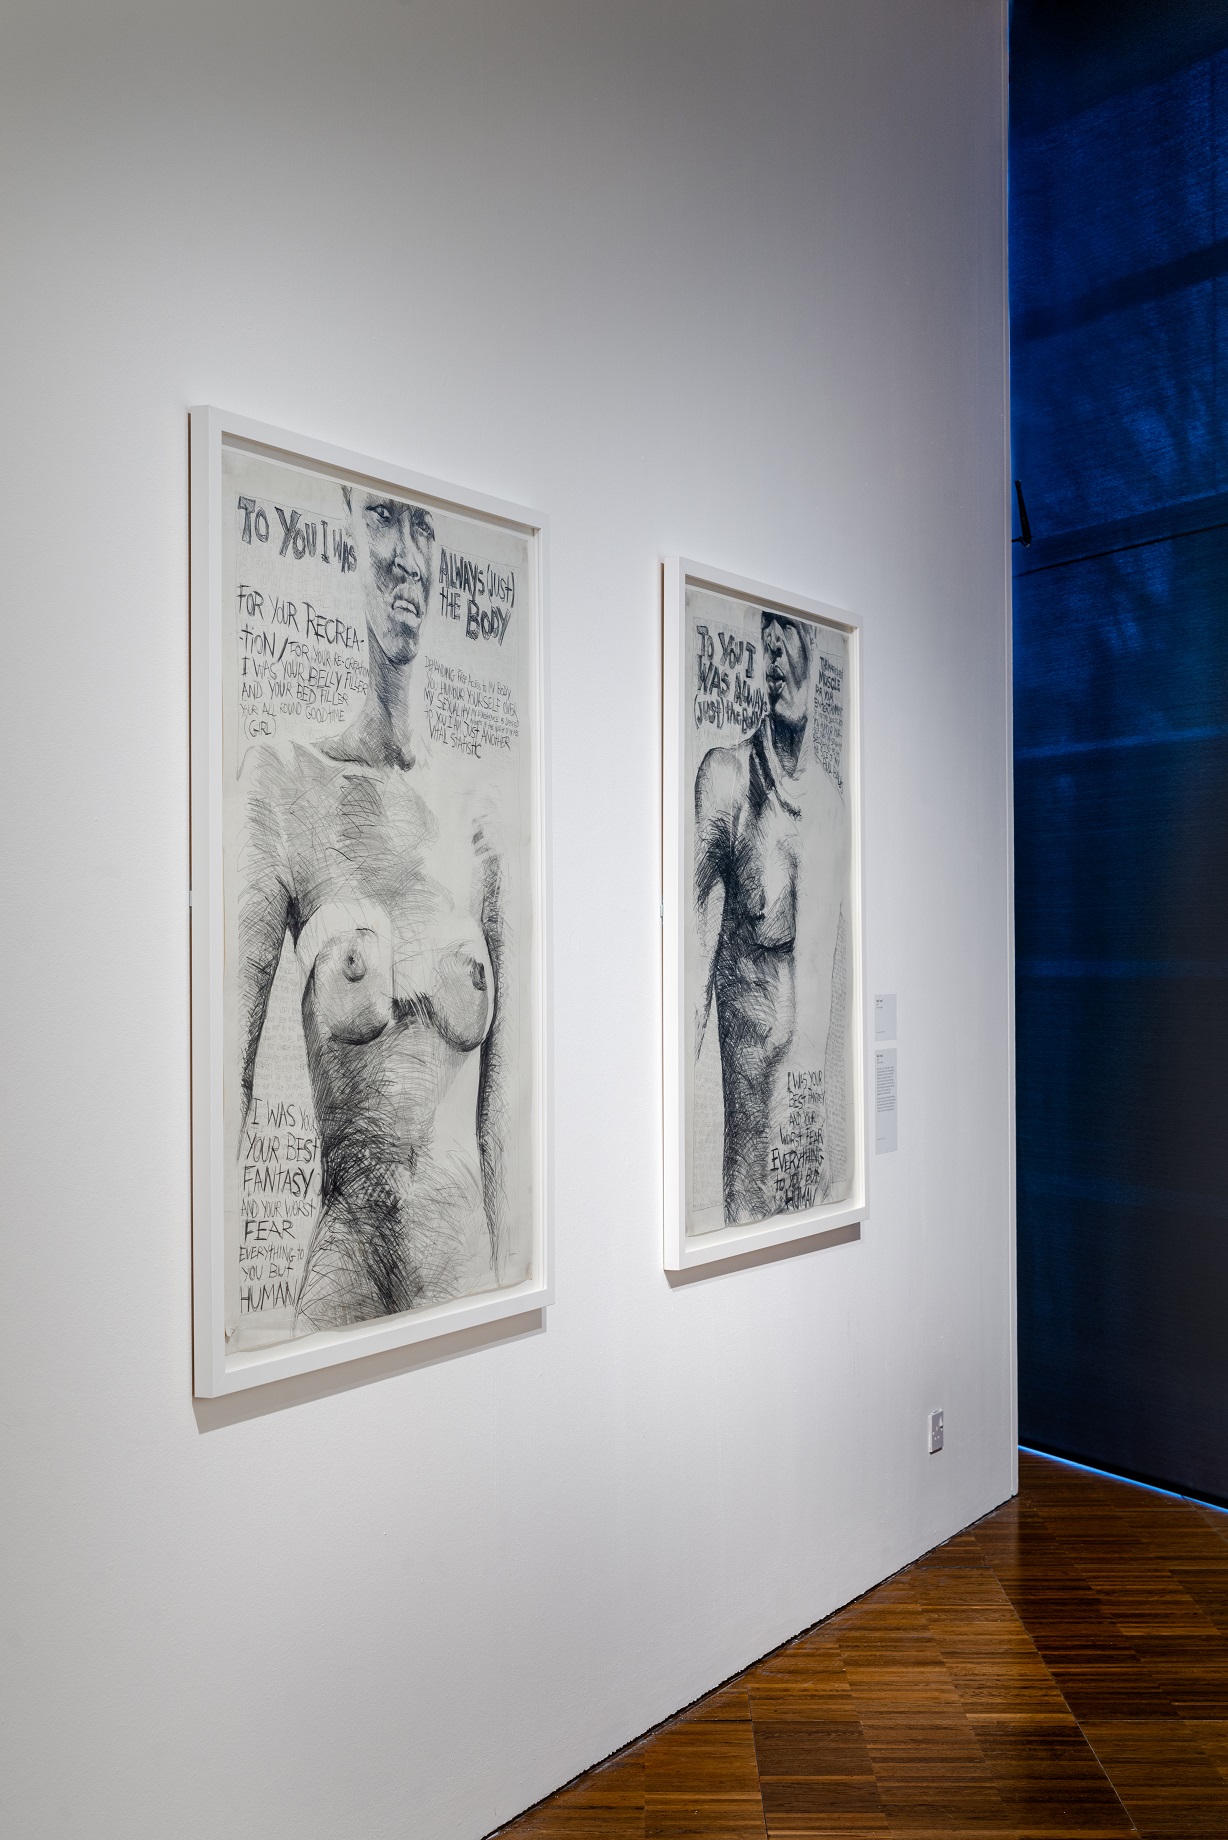 Keith Piper, Body Type 1 and 2, 1982